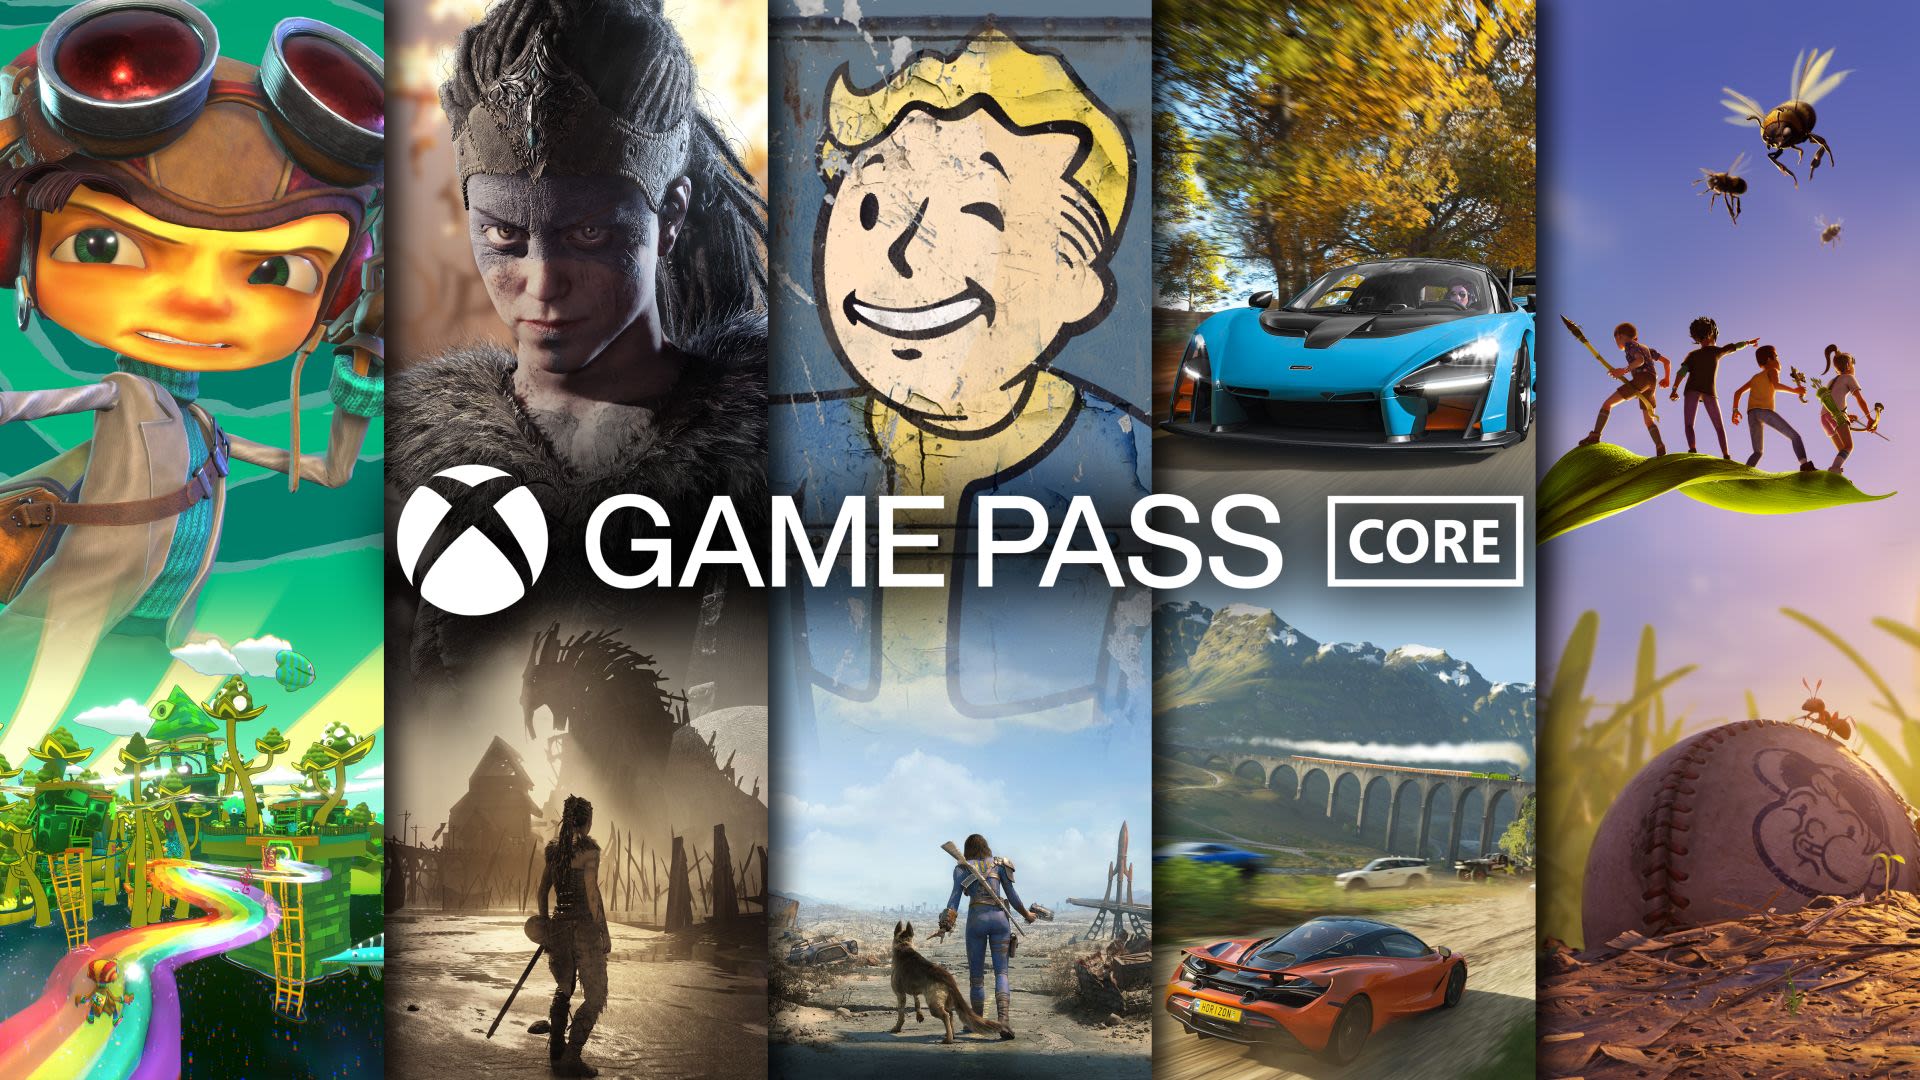 Xbox Game Pass Ultimate: Get one month of gaming access for just $1